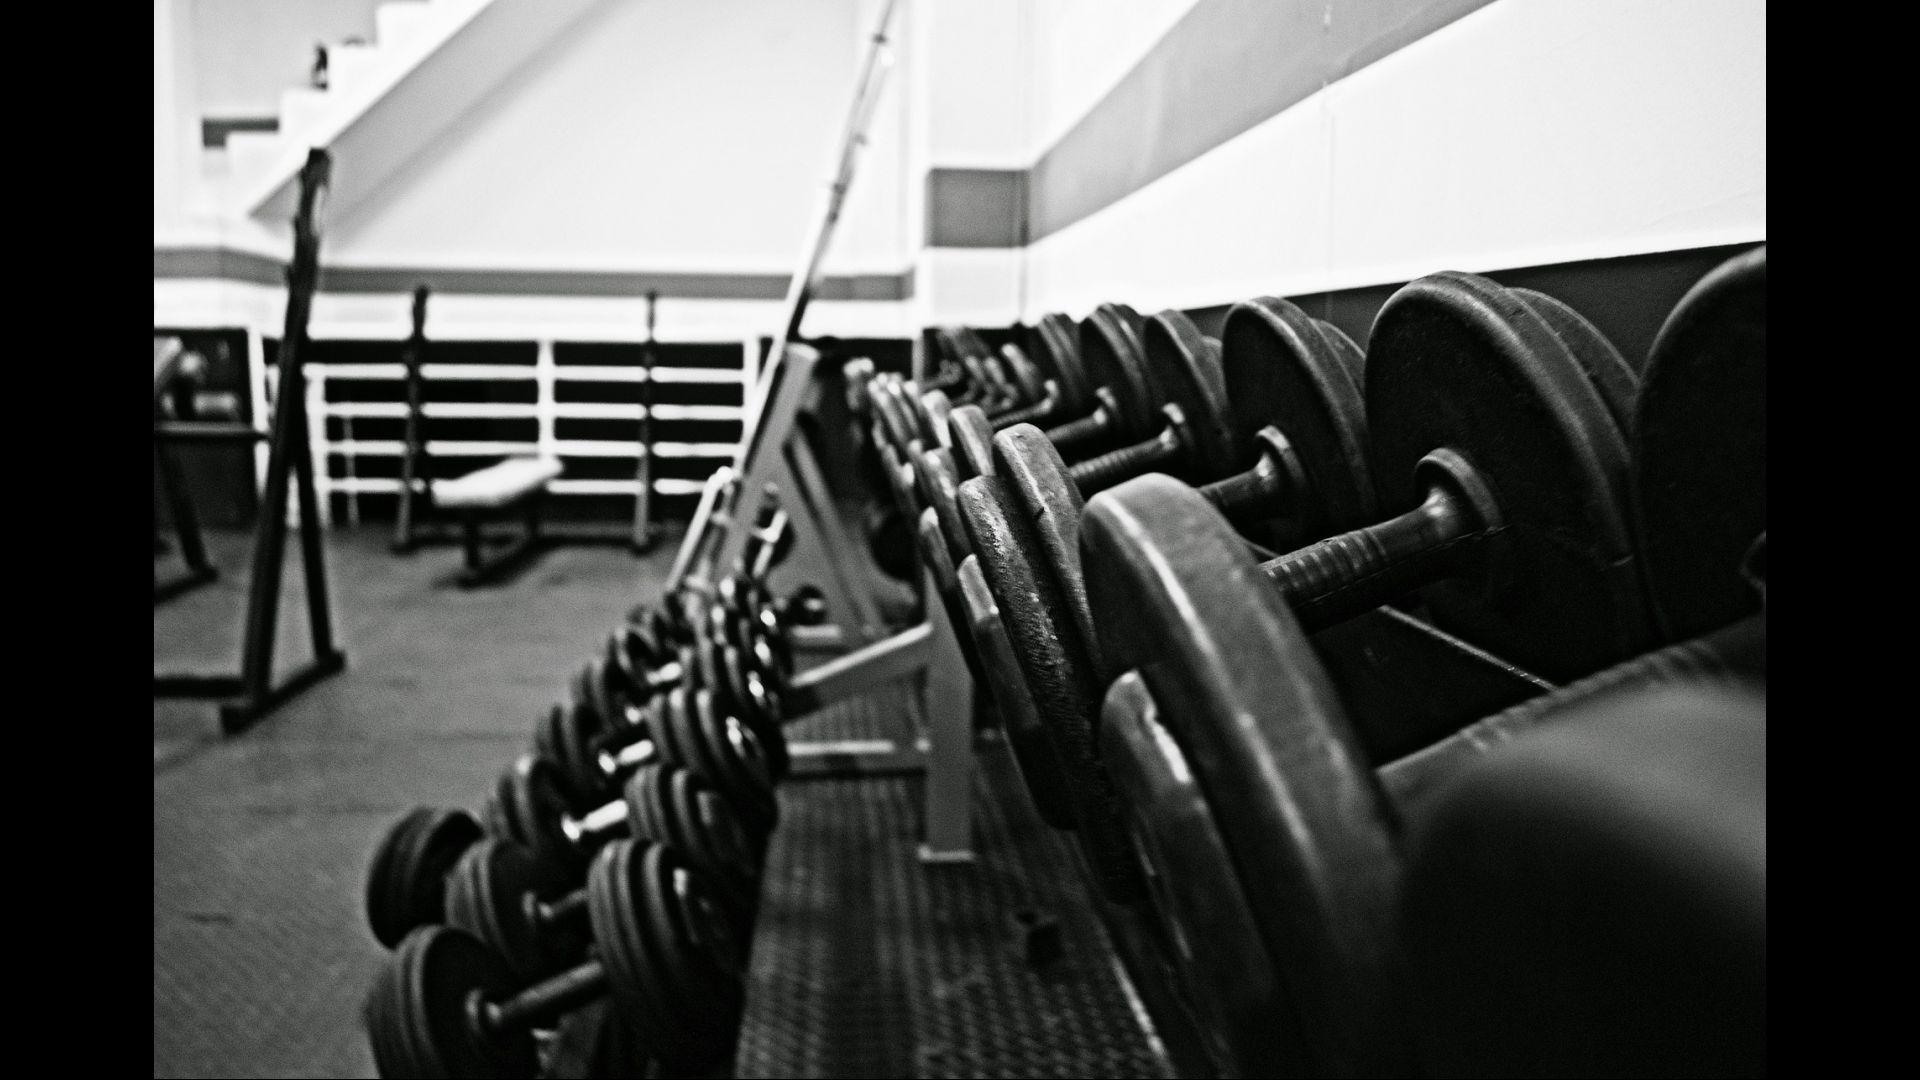 DUMBBELLS. FITNESS WALLPAPER for Android - APK Download